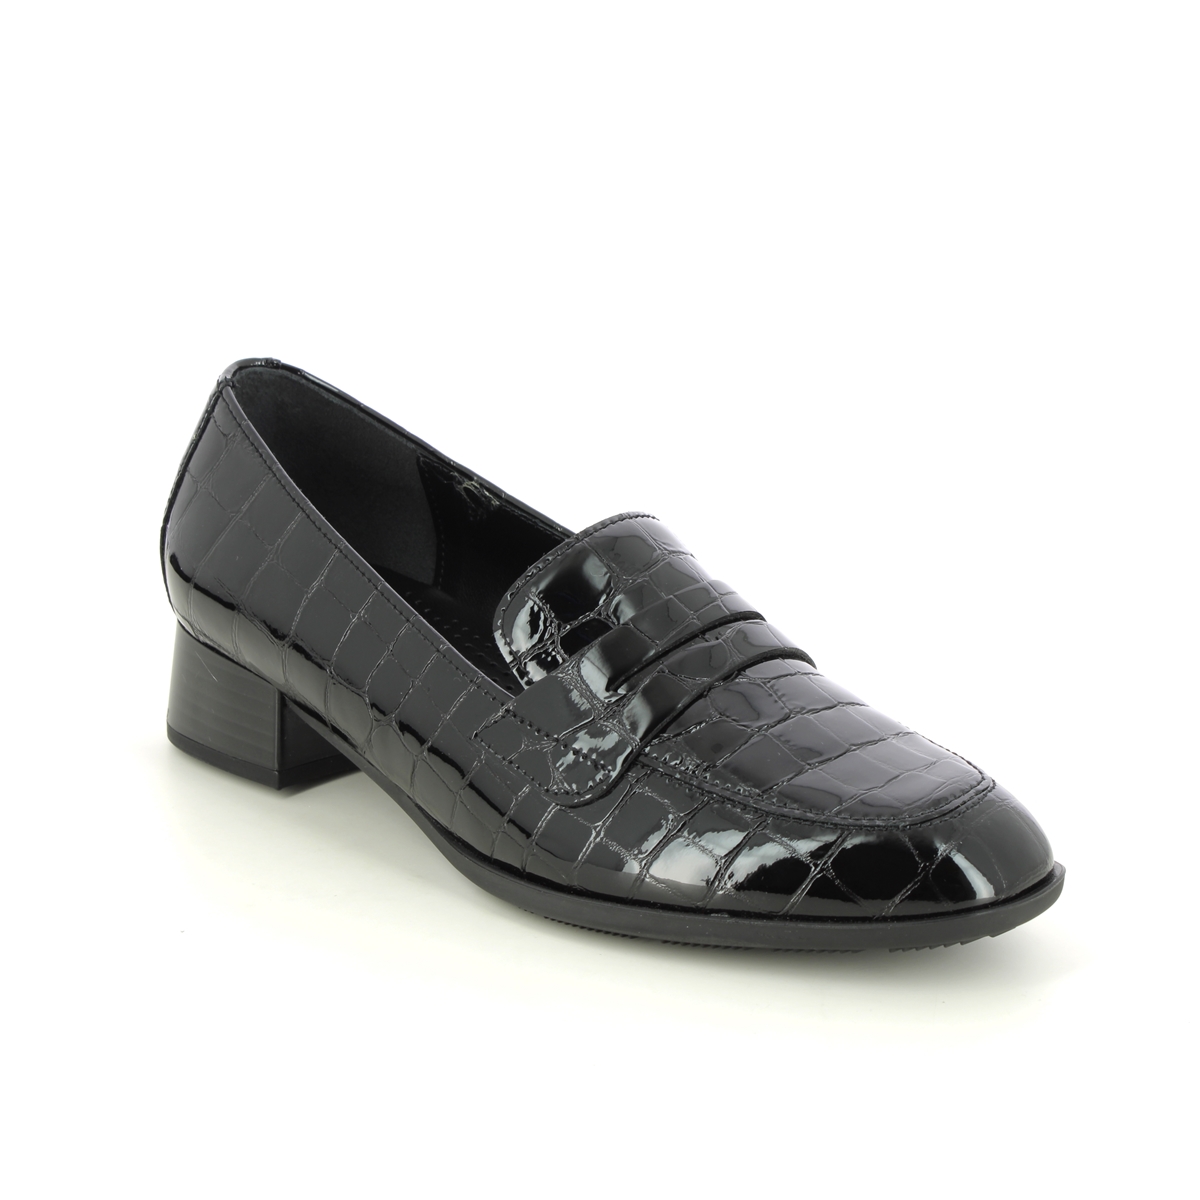 Gabor Right Penny Black Croc Womens Loafers 35.280.97 In Size 6 In Plain Black Croc Effect  Womens Loafers In Soft Black Croc Effect Leather